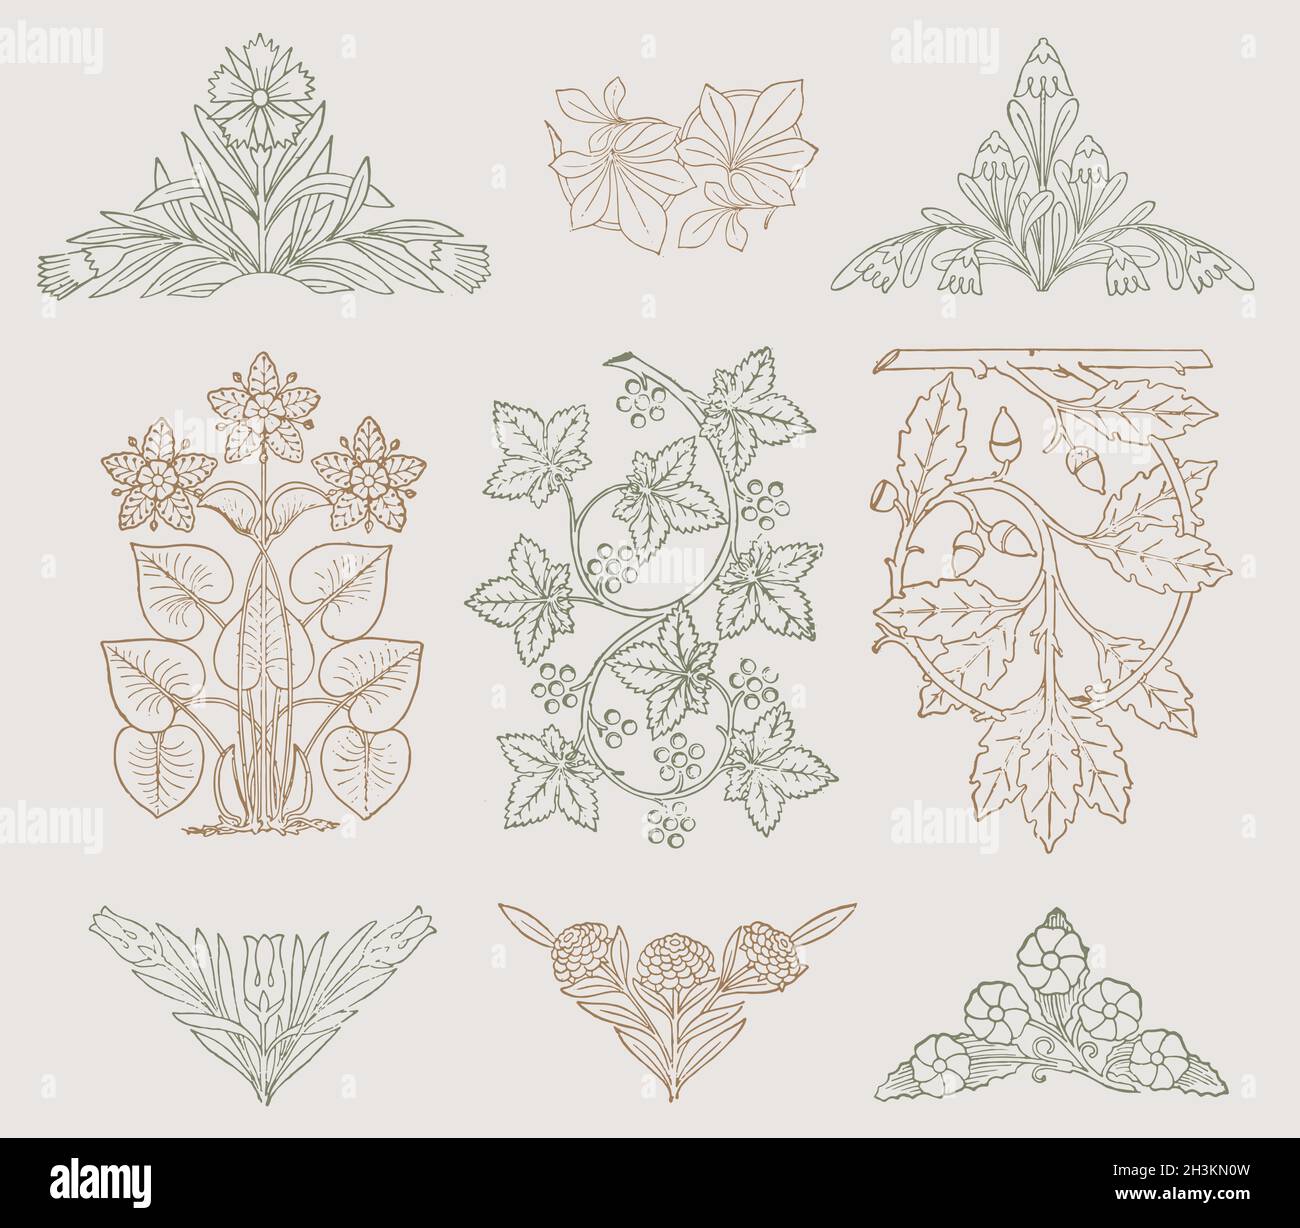 Delicate vintage leaves and flowers. Imagery for natural products, herbals and packaging design. Stock Vector